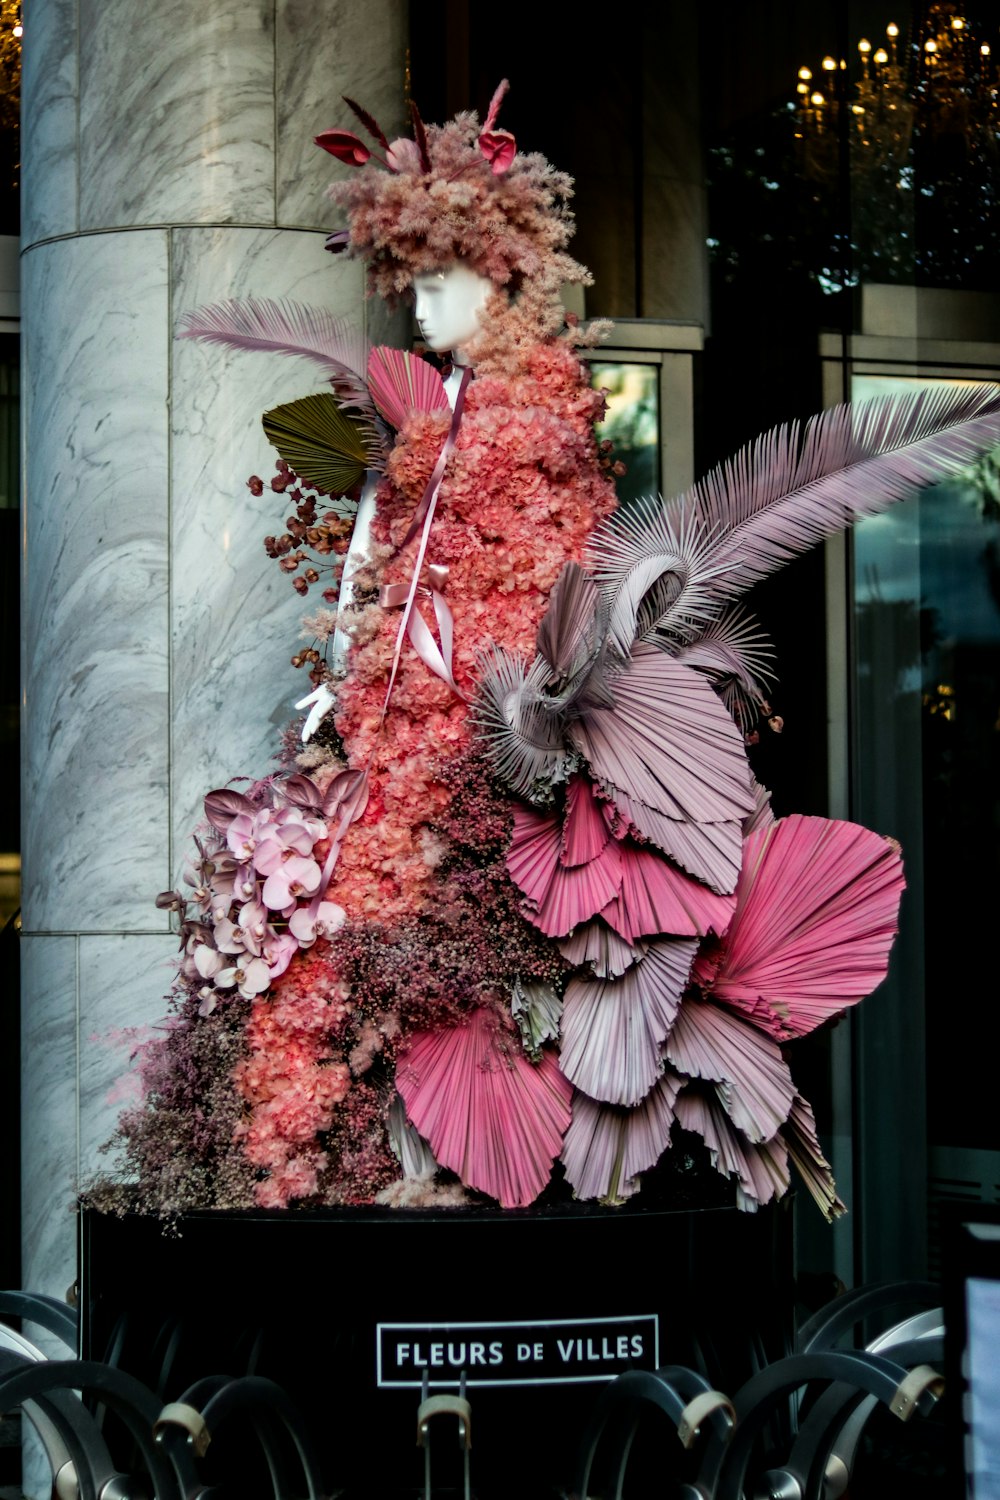 a display of flowers and feathers in a building